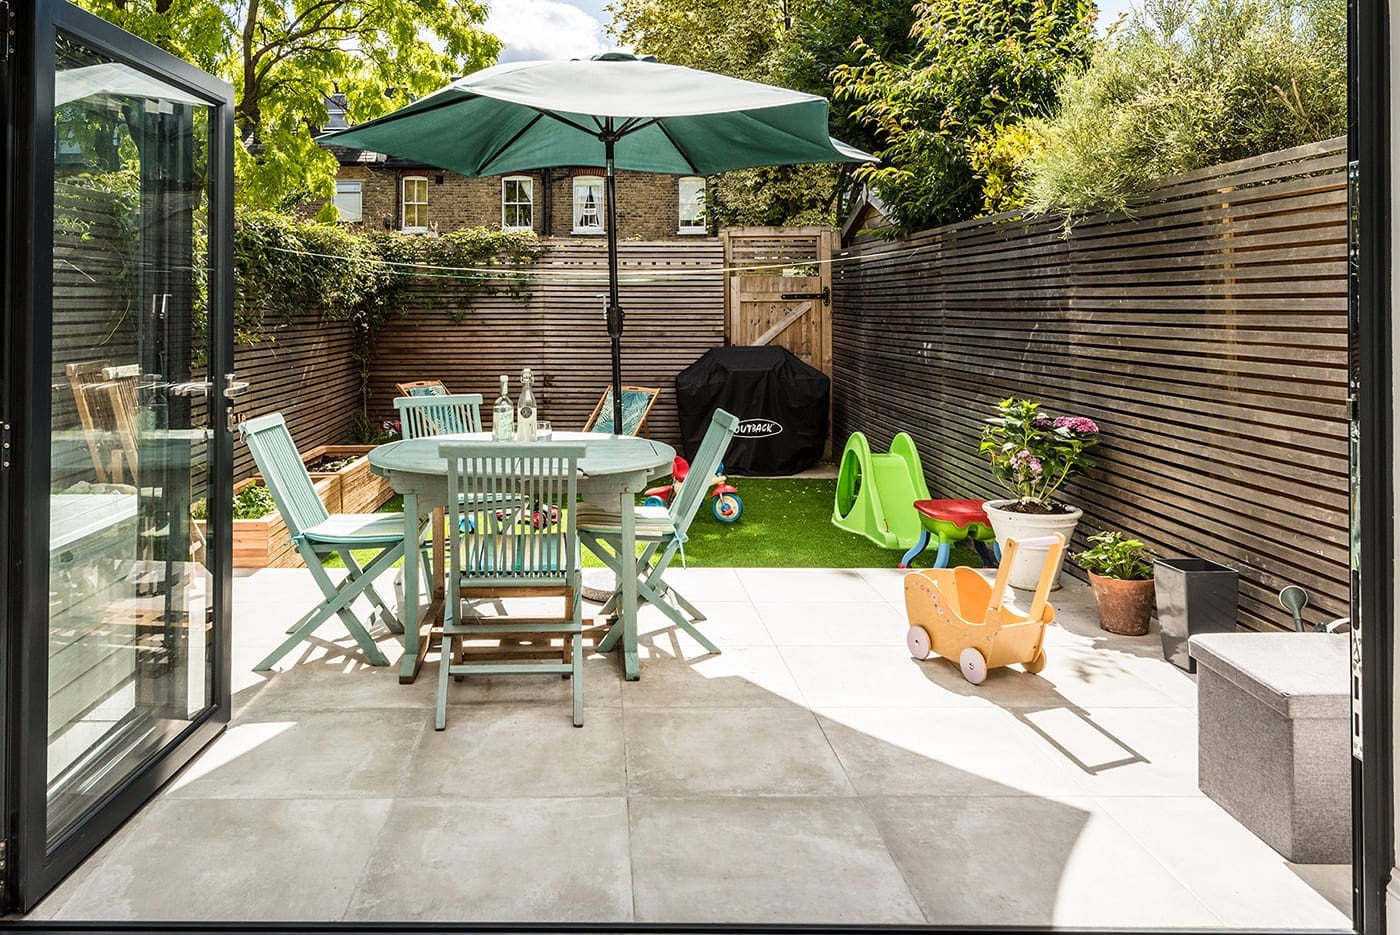 Back garden with table and kids play area